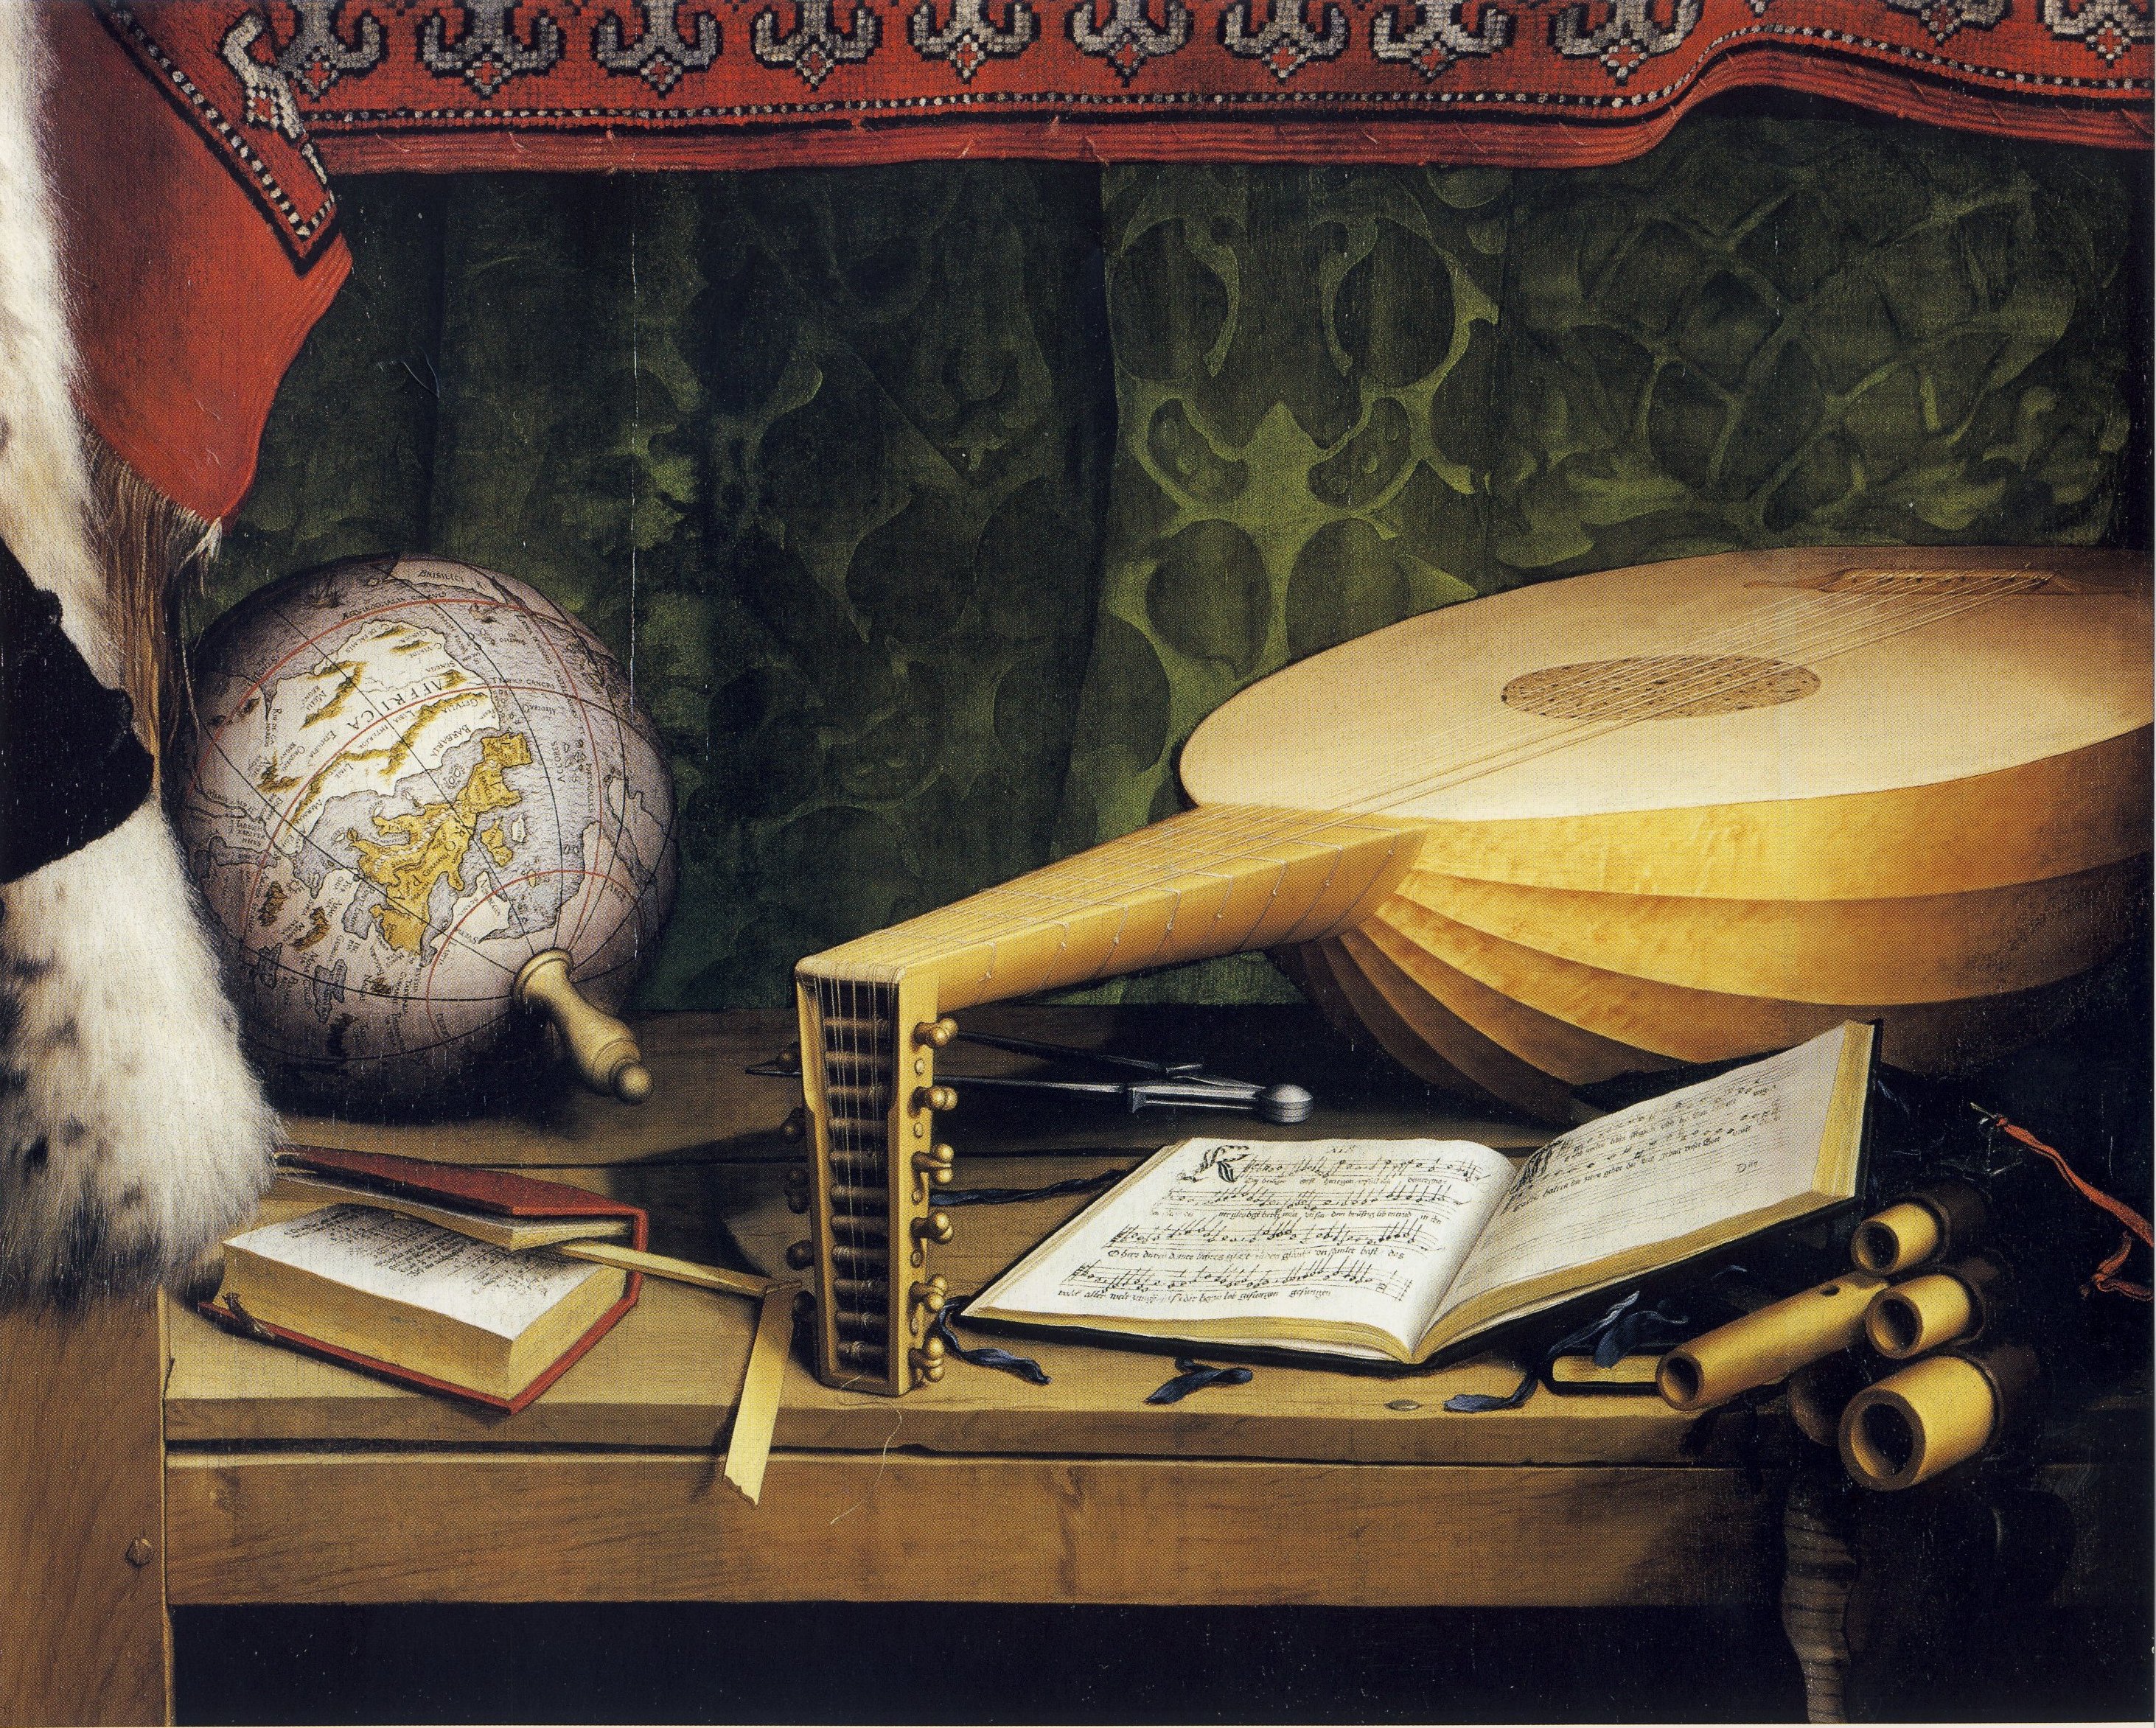 The Ambassadors, detail of globe, lute, and books, by Hans Holbein the Younger of Death, by Hans Holbein the Younger